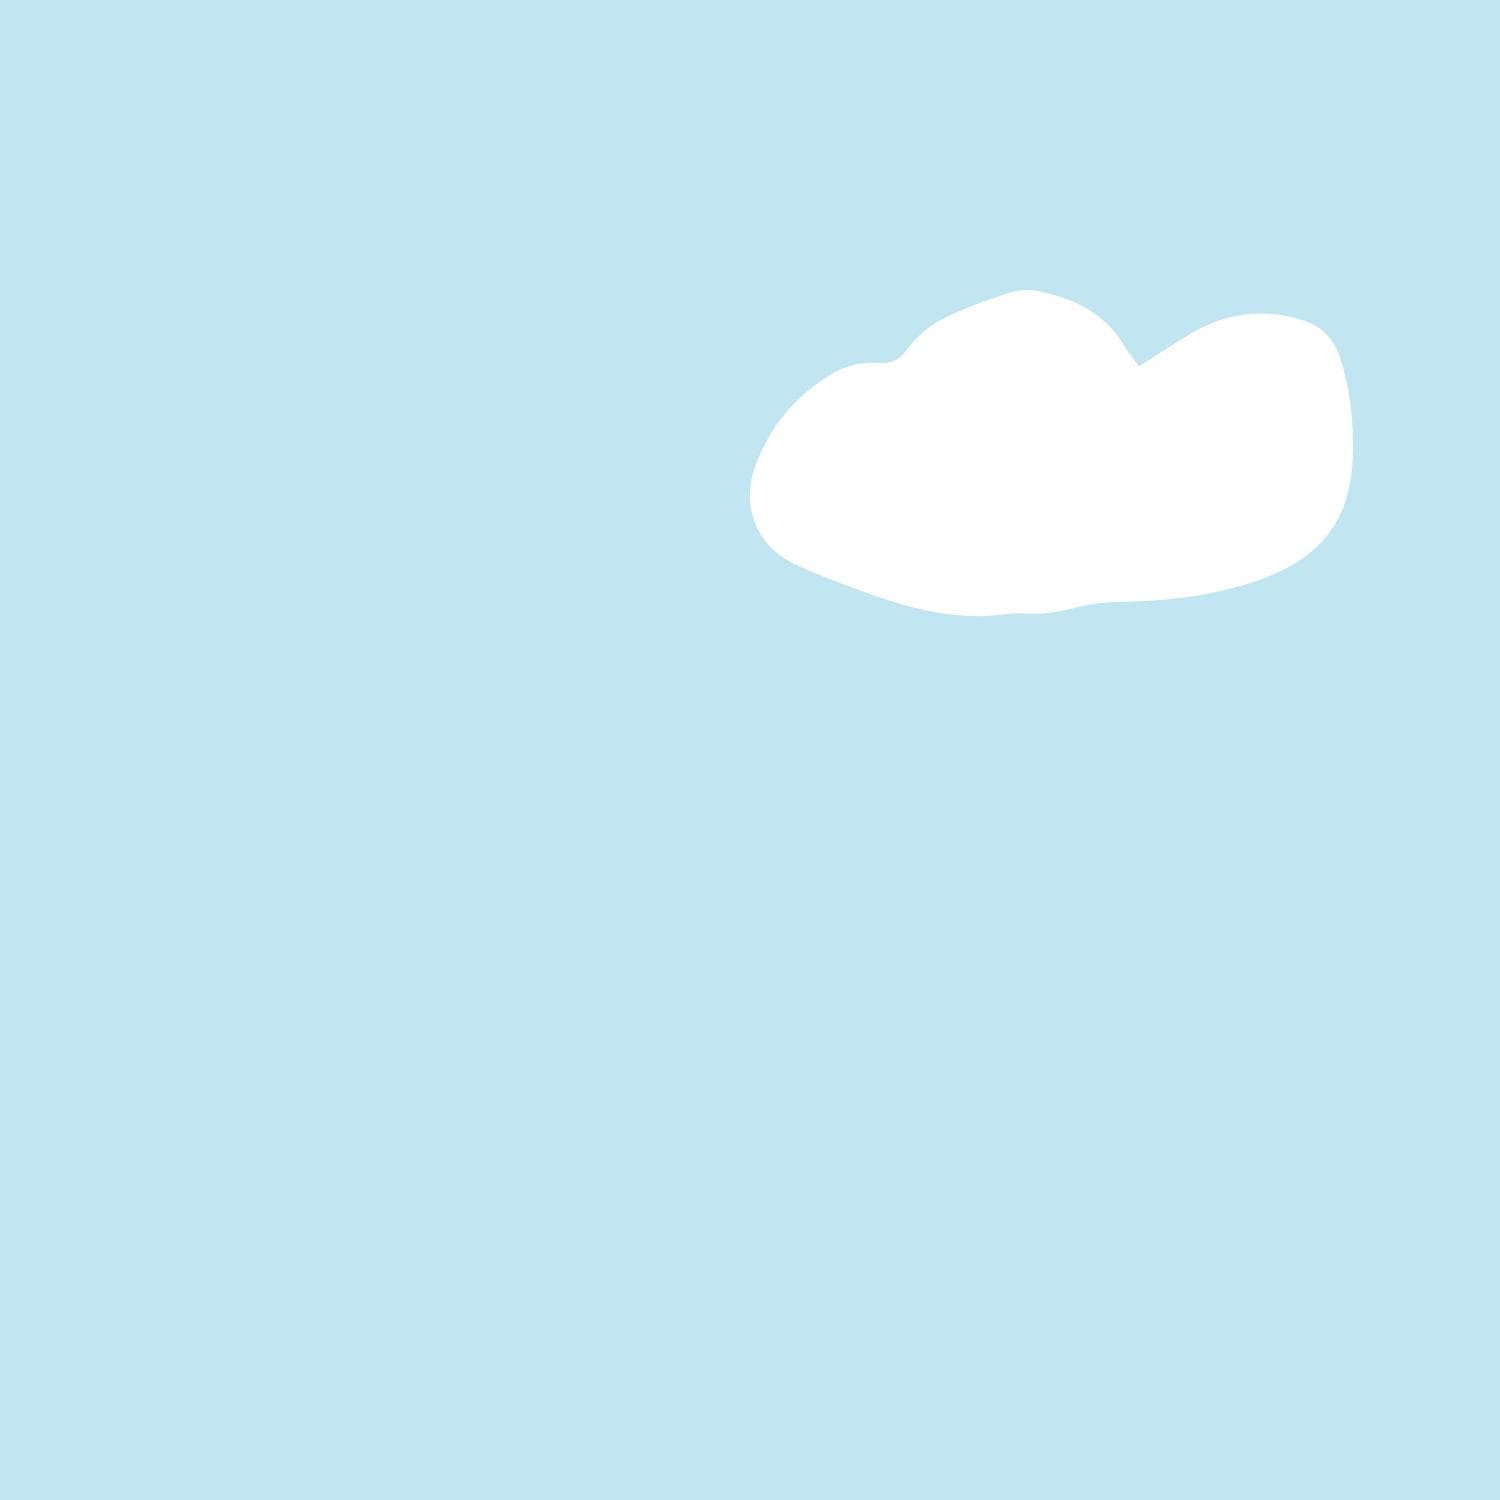 Illustration of a white cloud in a blue sky